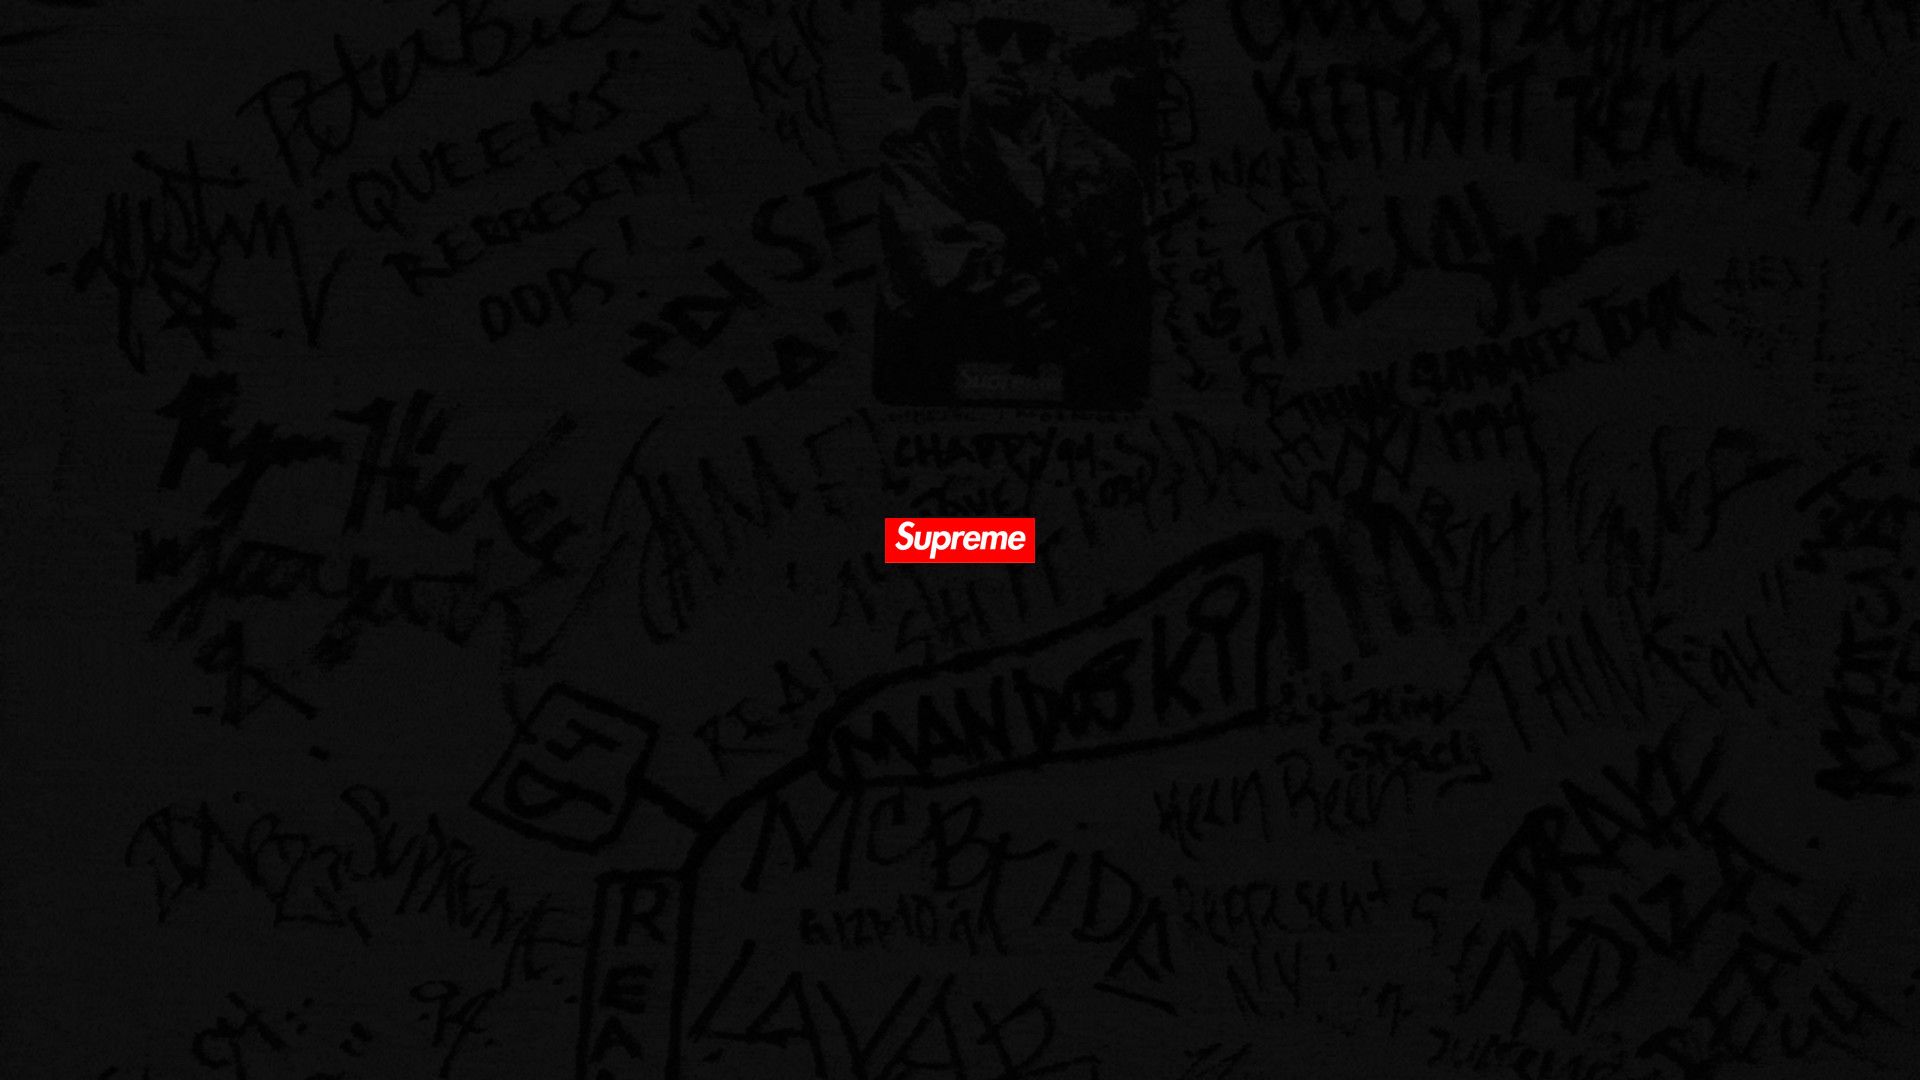 1920x1080 Supreme Wallpaper   HD Wallpapers Backgrounds of Your